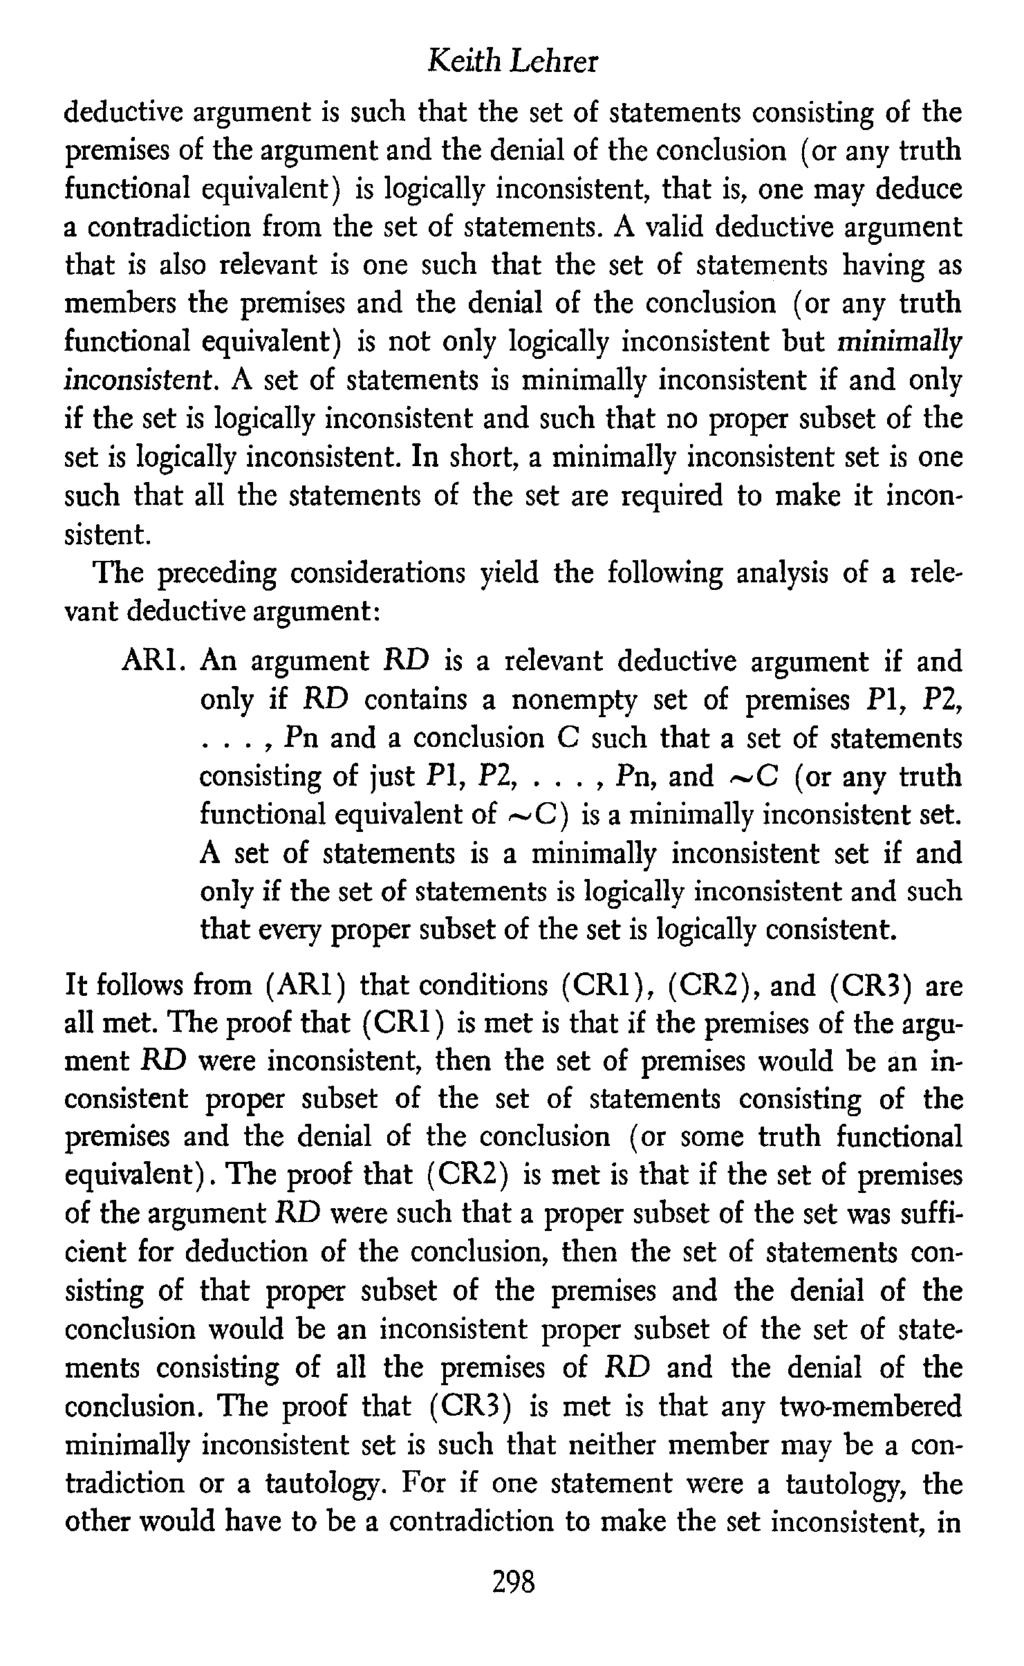 Keith Lehrer deductive argument is such that the set of statements consisting of the premises of the argument and the denial of the conclusion (or any truth functional equivalent) is logically